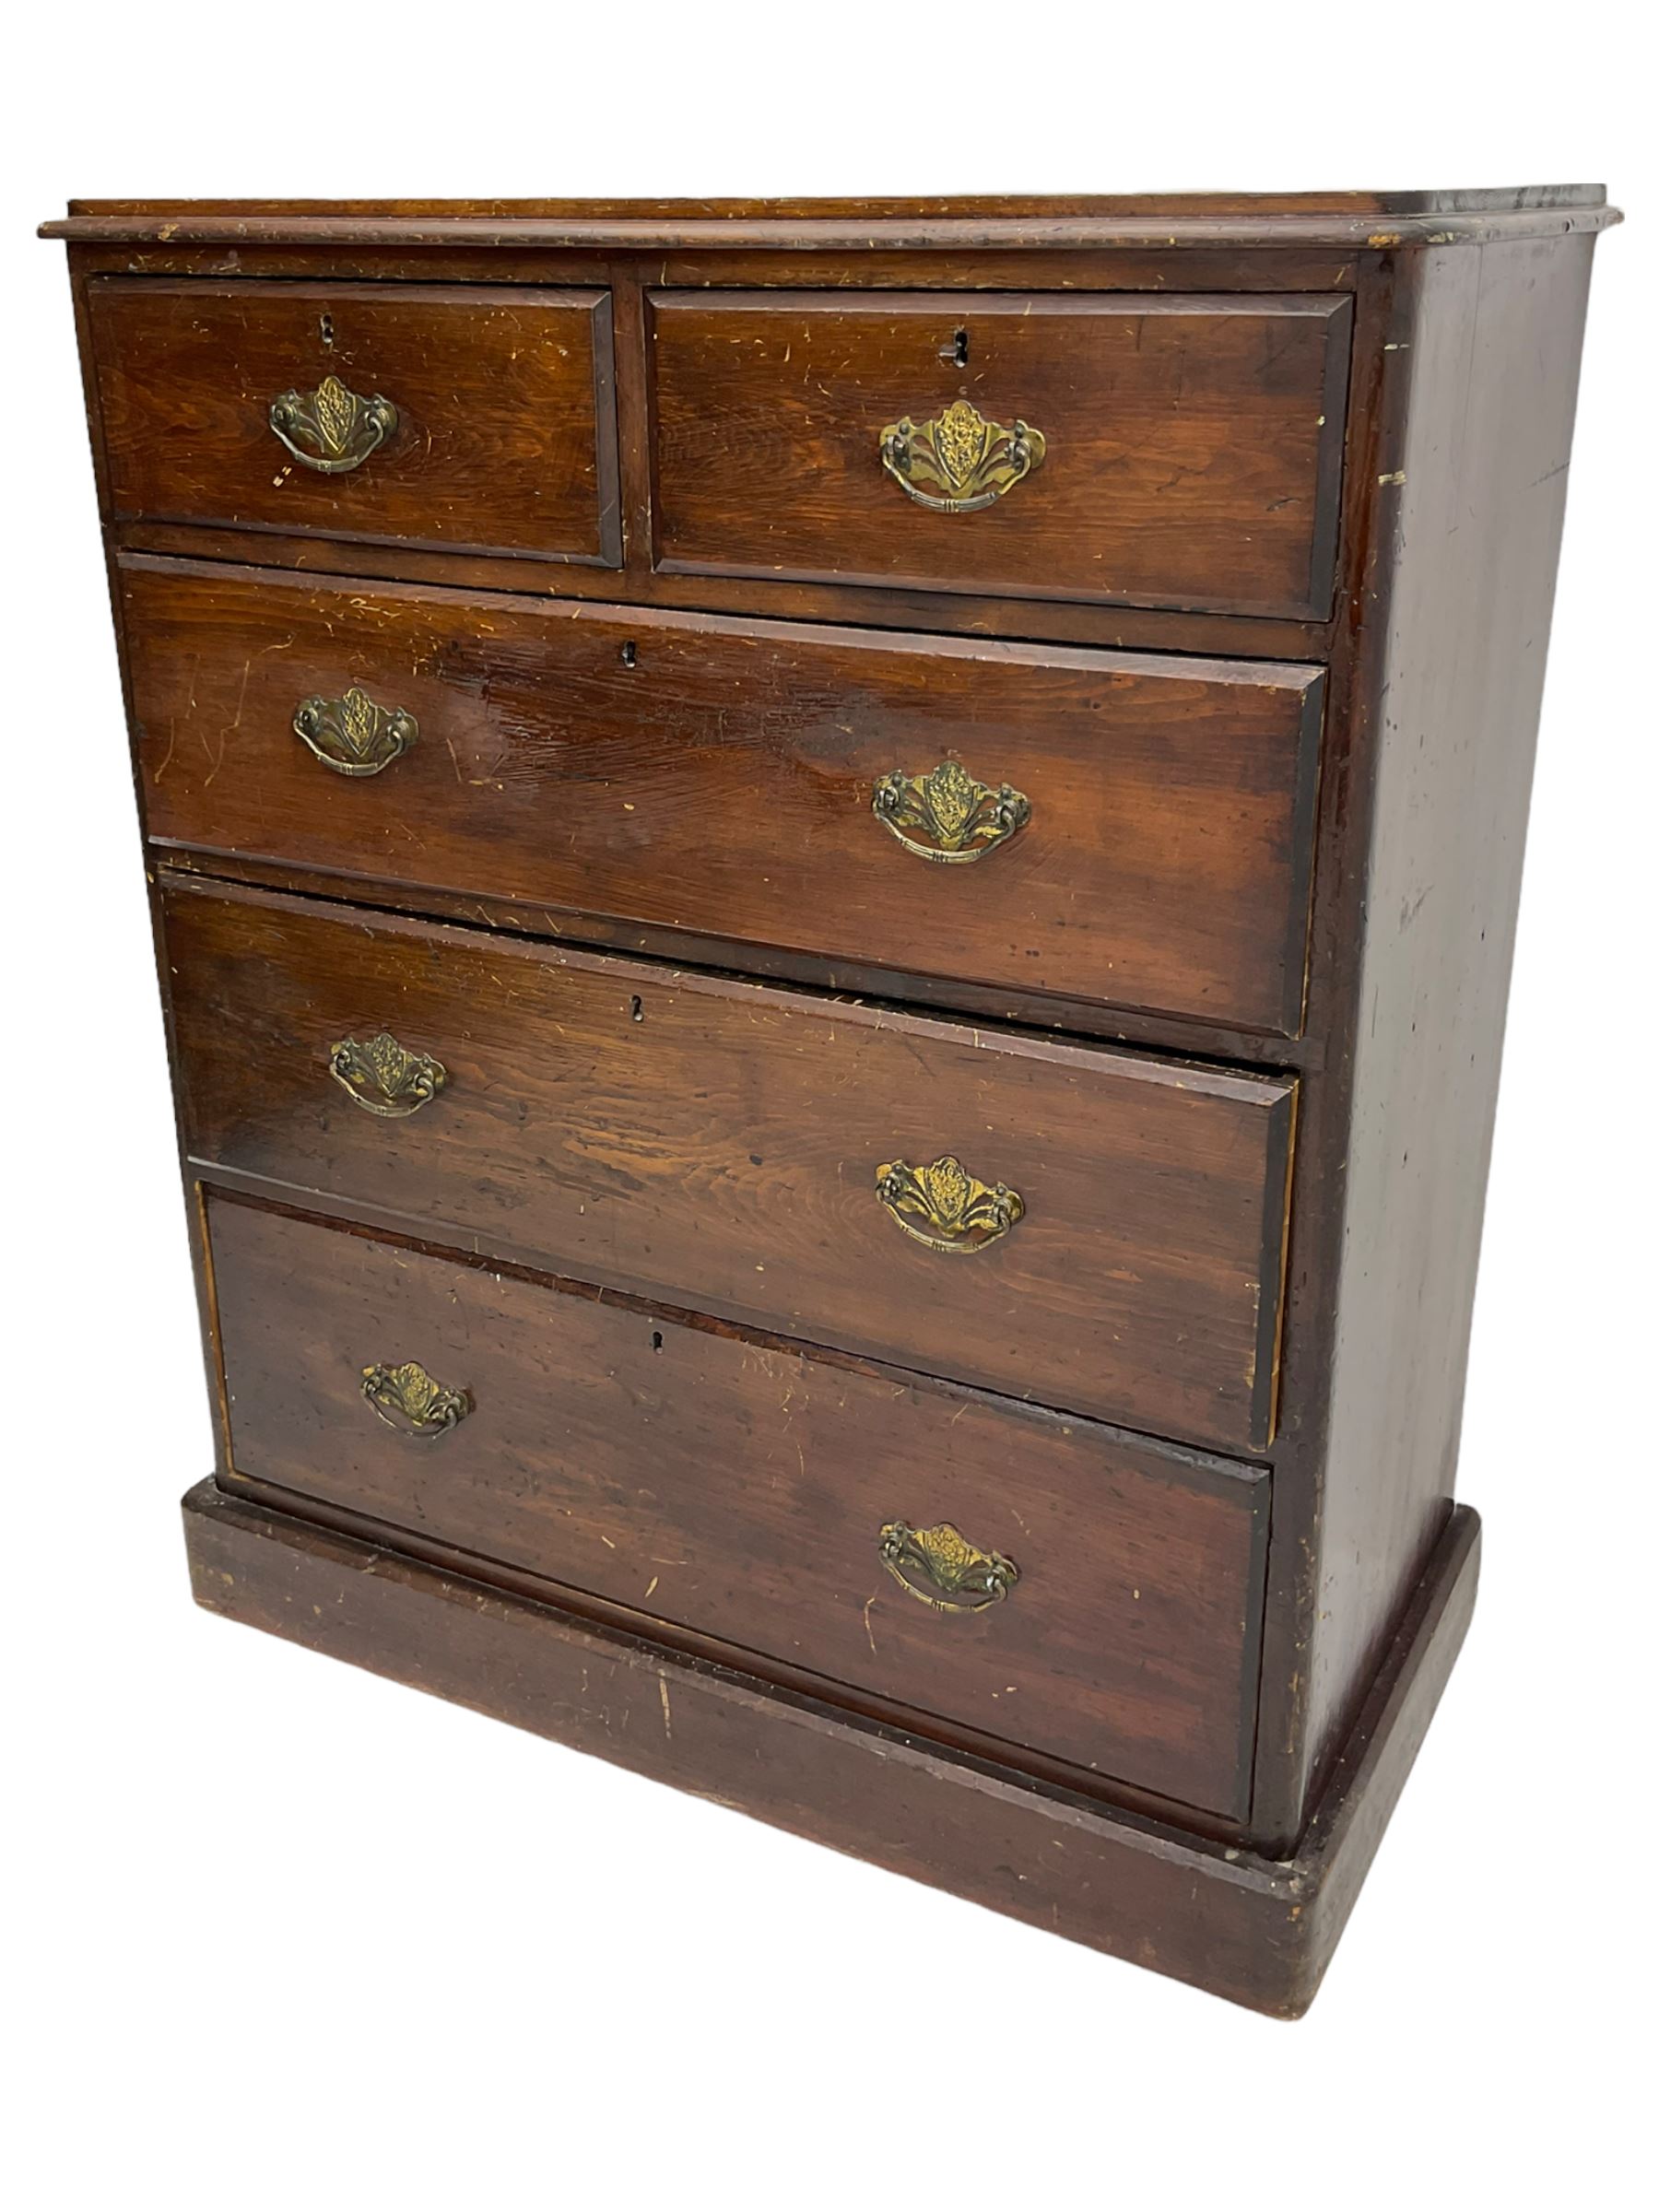 19th century stained pine chest - Image 2 of 5